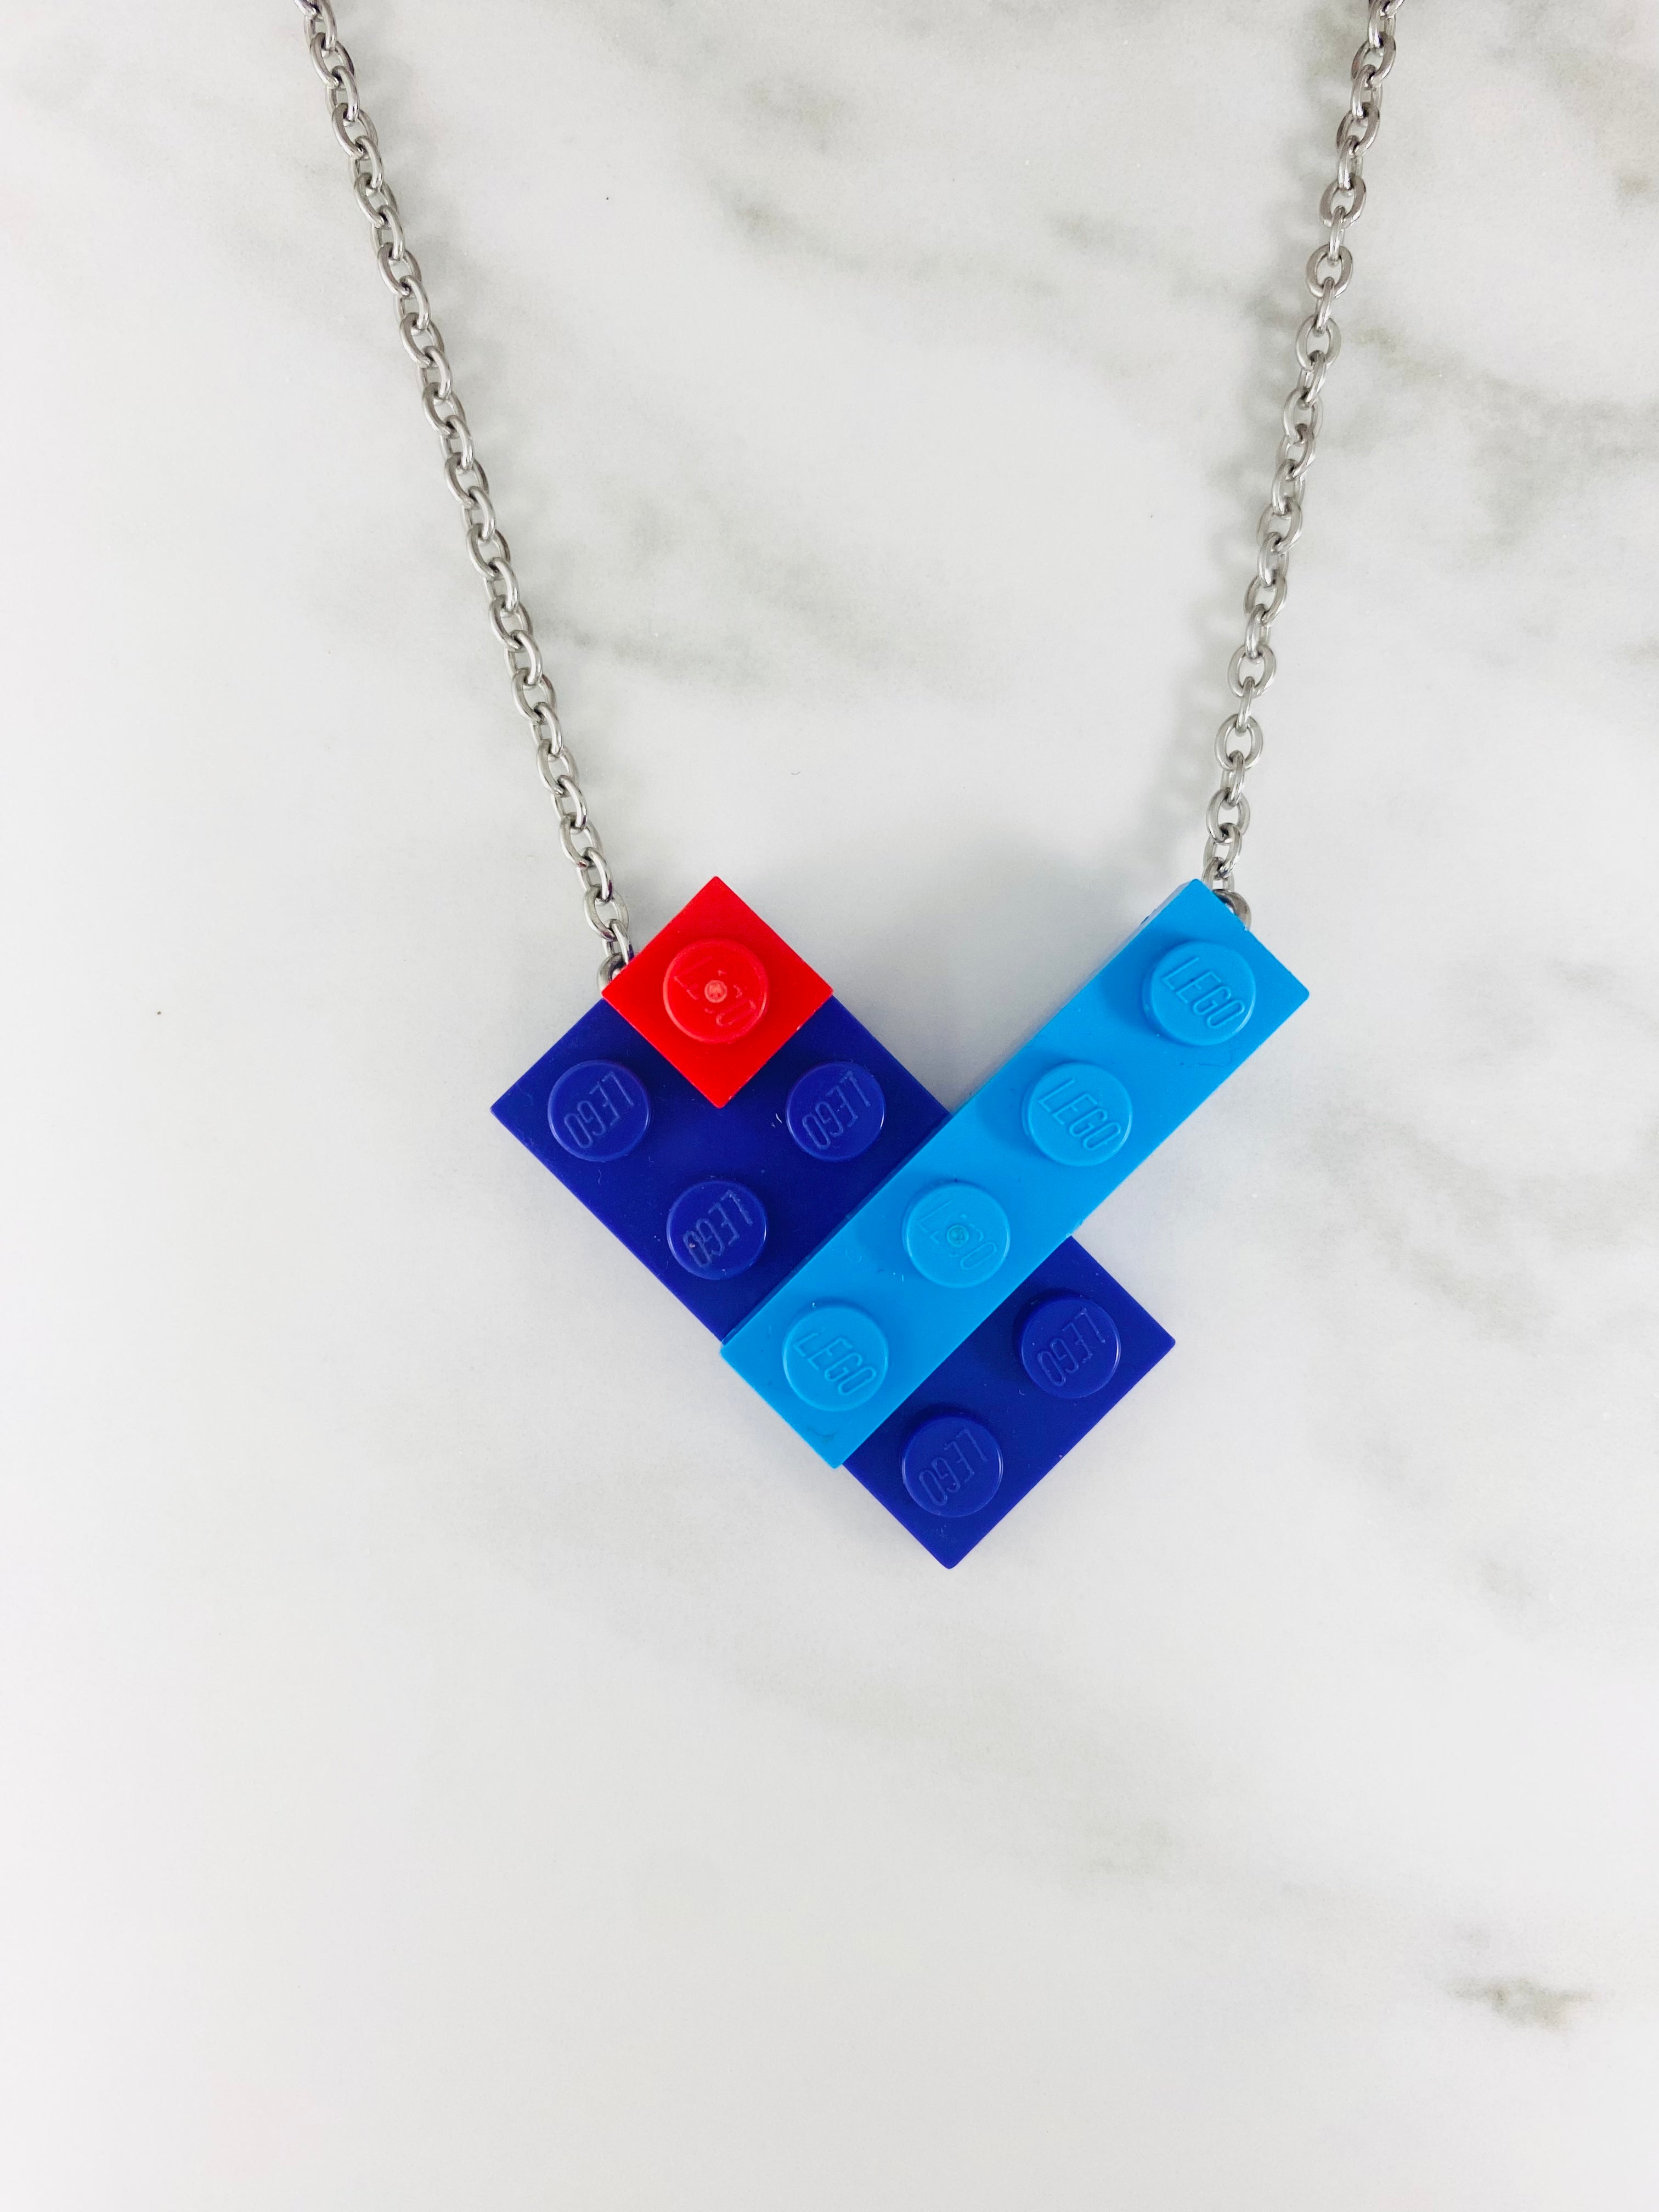 Blue and light blue Tu Snaps necklace made from Lego pieces with an extra added red Lego piece